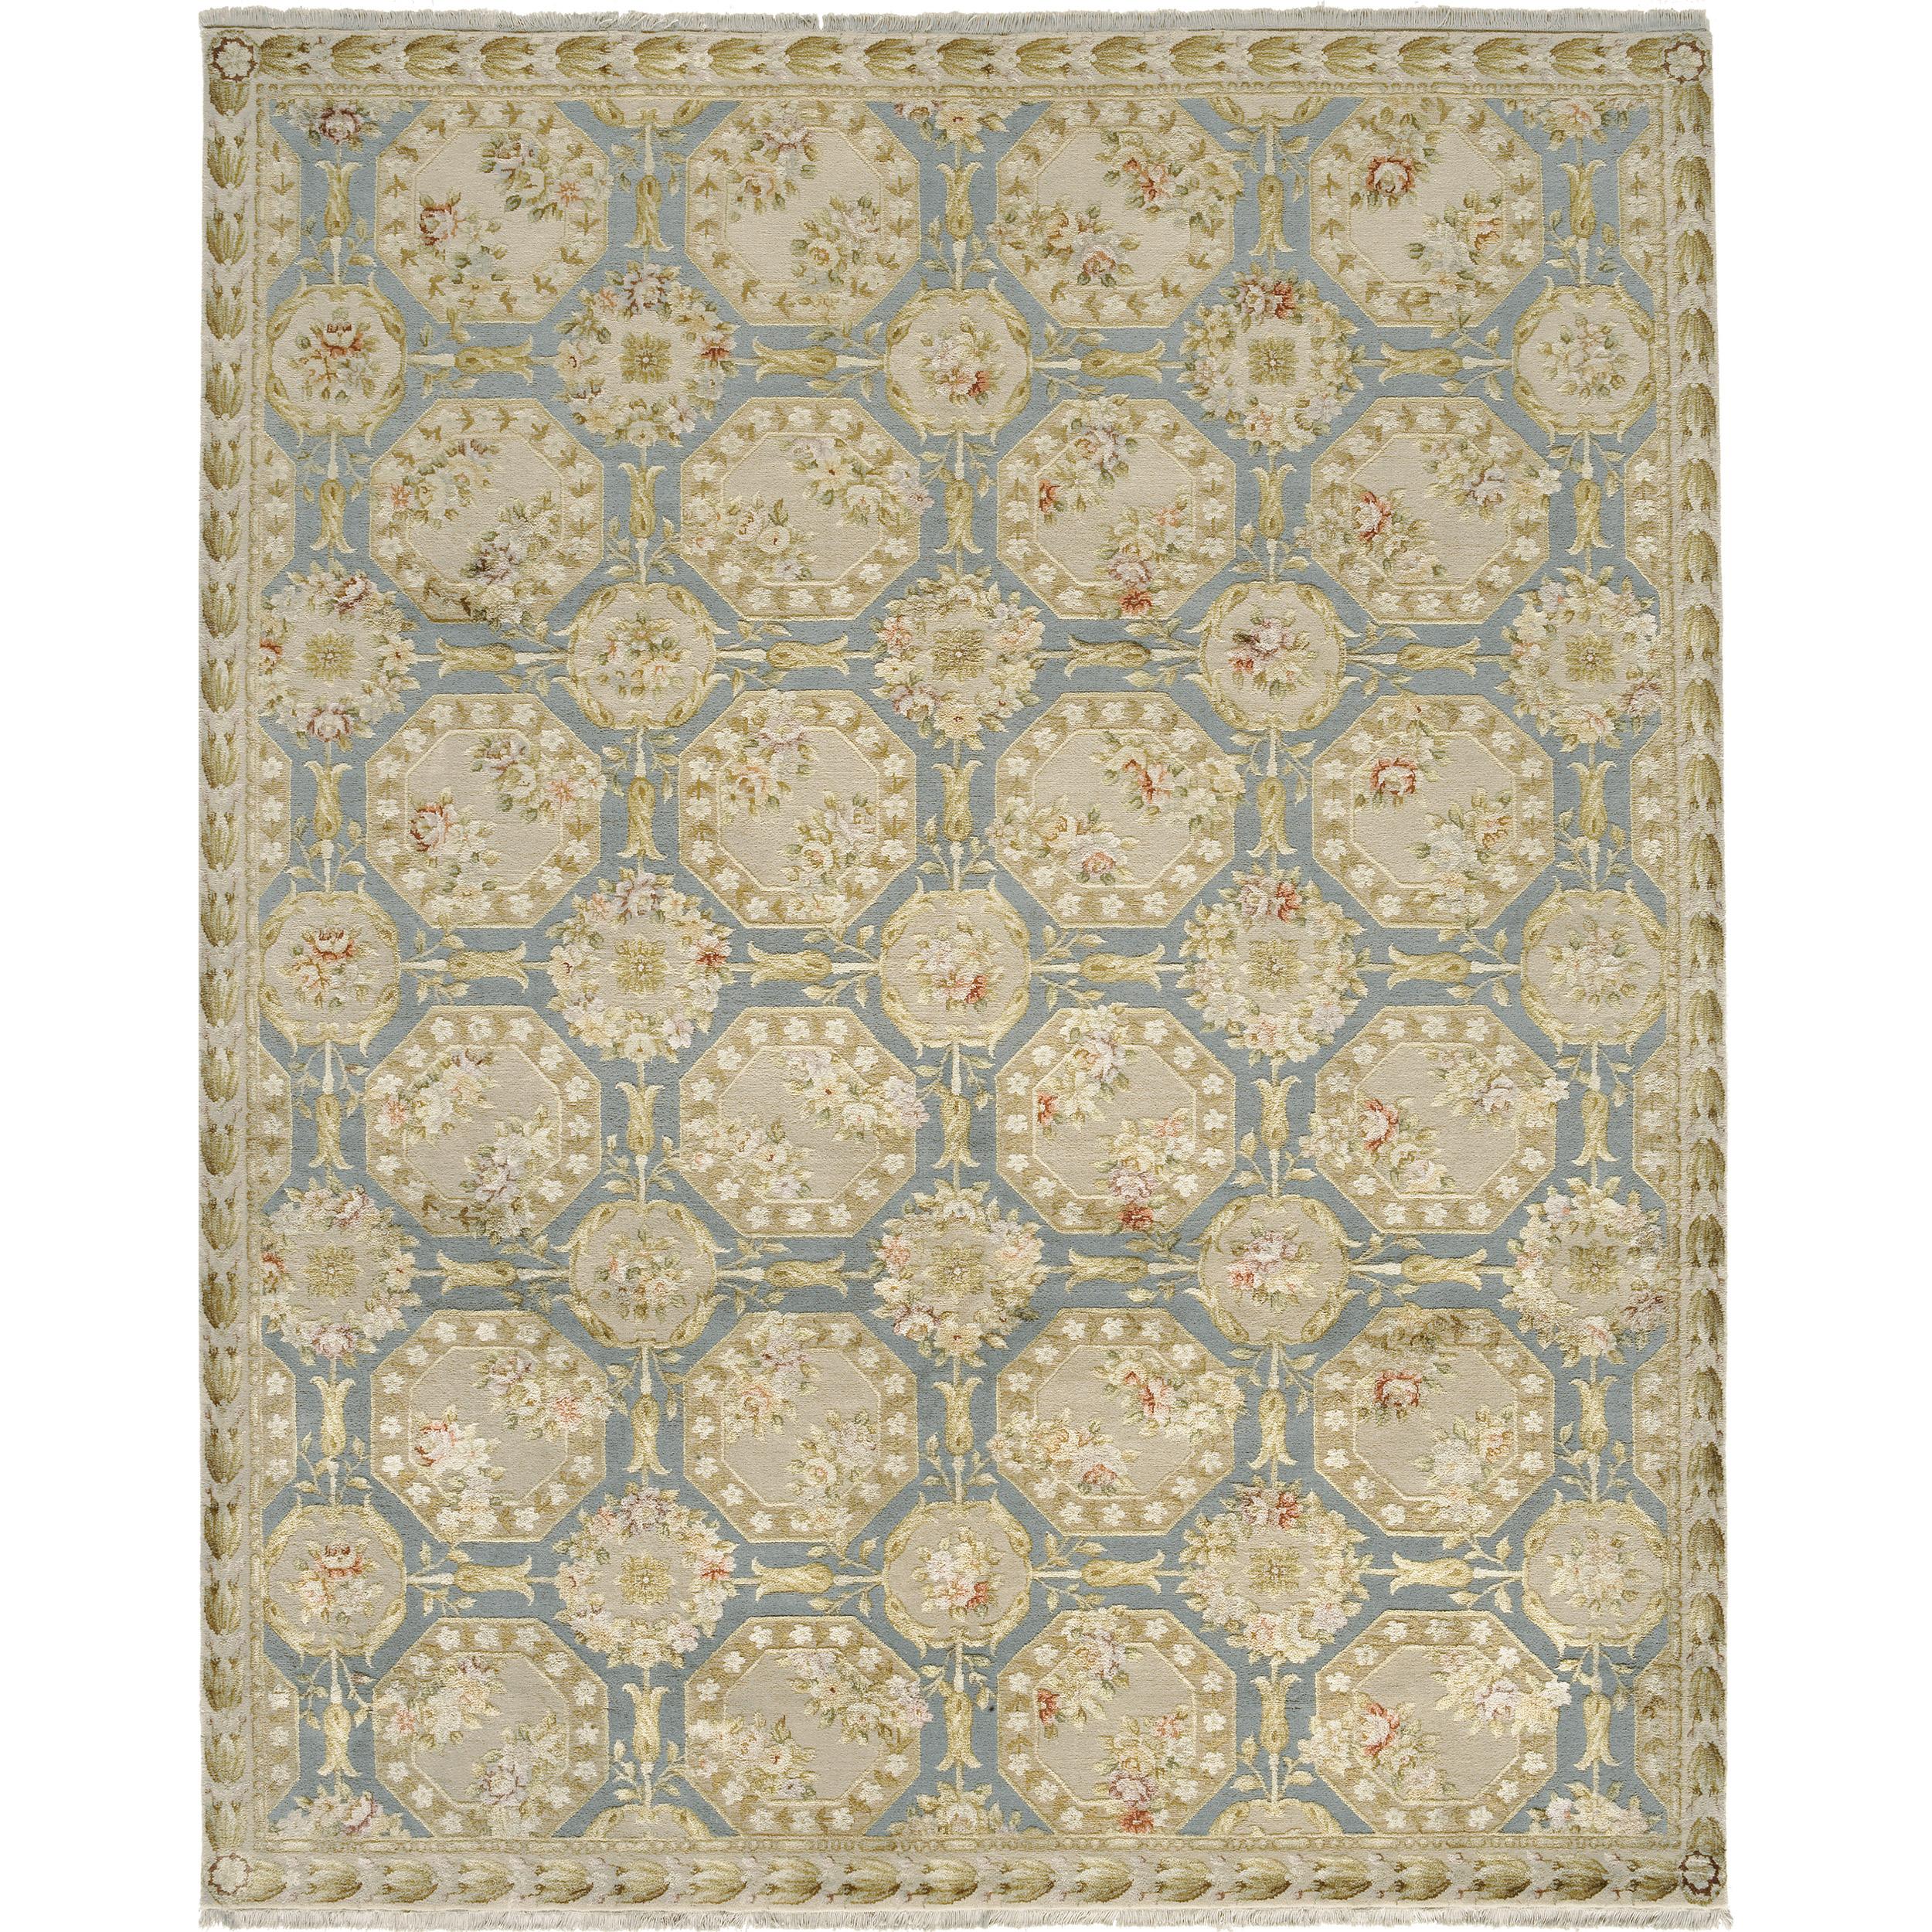 Luxury European Hand-Knotted Fairfax Sterling & Cream 12x15 Rug In New Condition For Sale In Secaucus, NJ